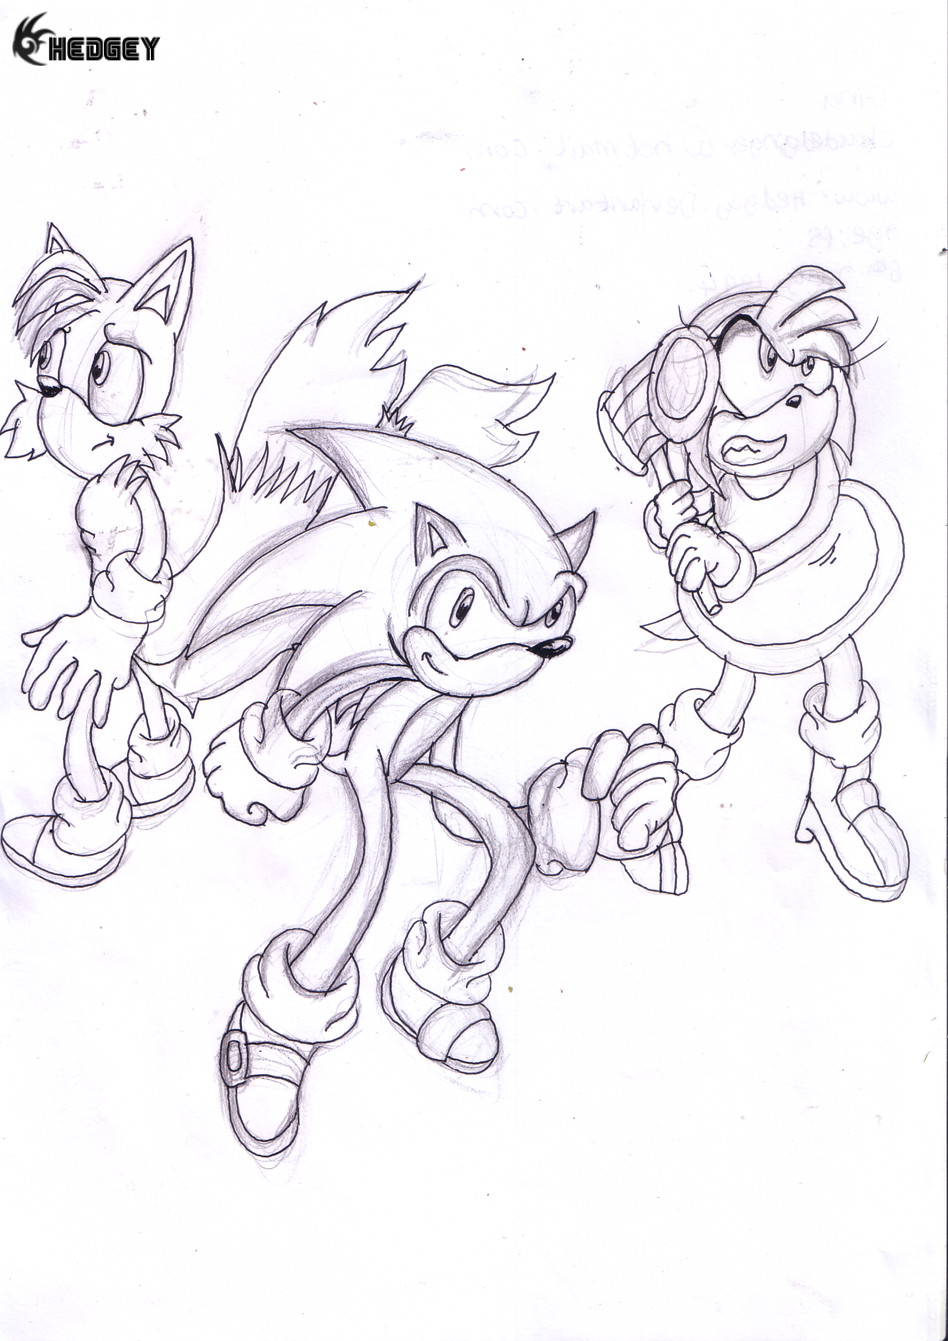 SOS 09 - Sonic Chronicles Pic by ginathehedgehog